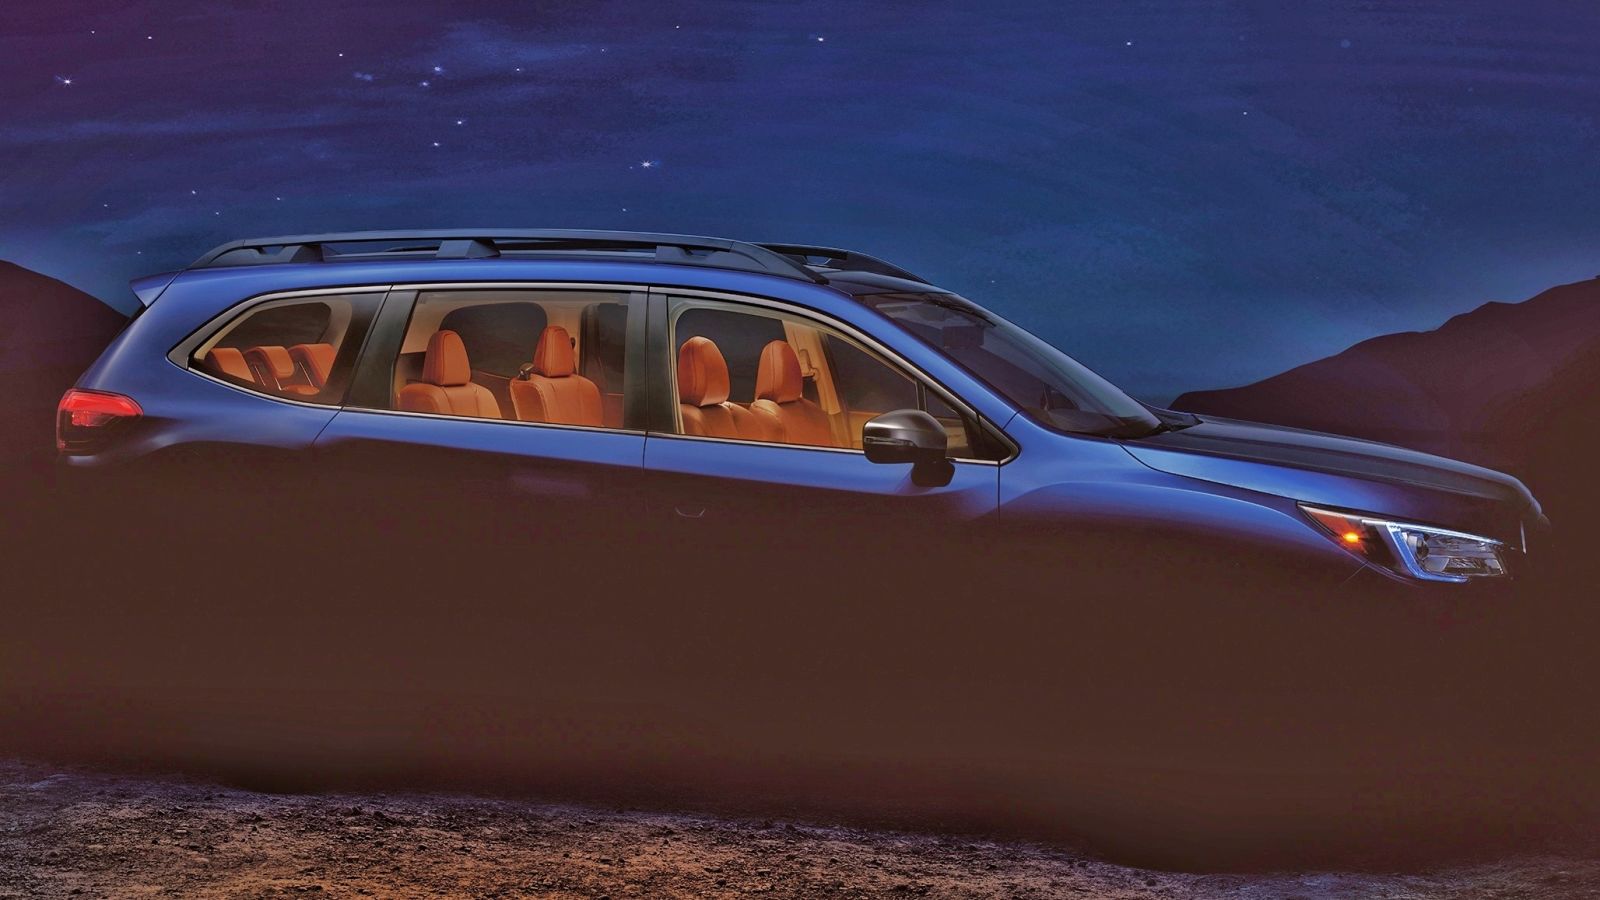 Illustration for article titled Subaru has released the floating top half of the new Ascent 3-row crossover